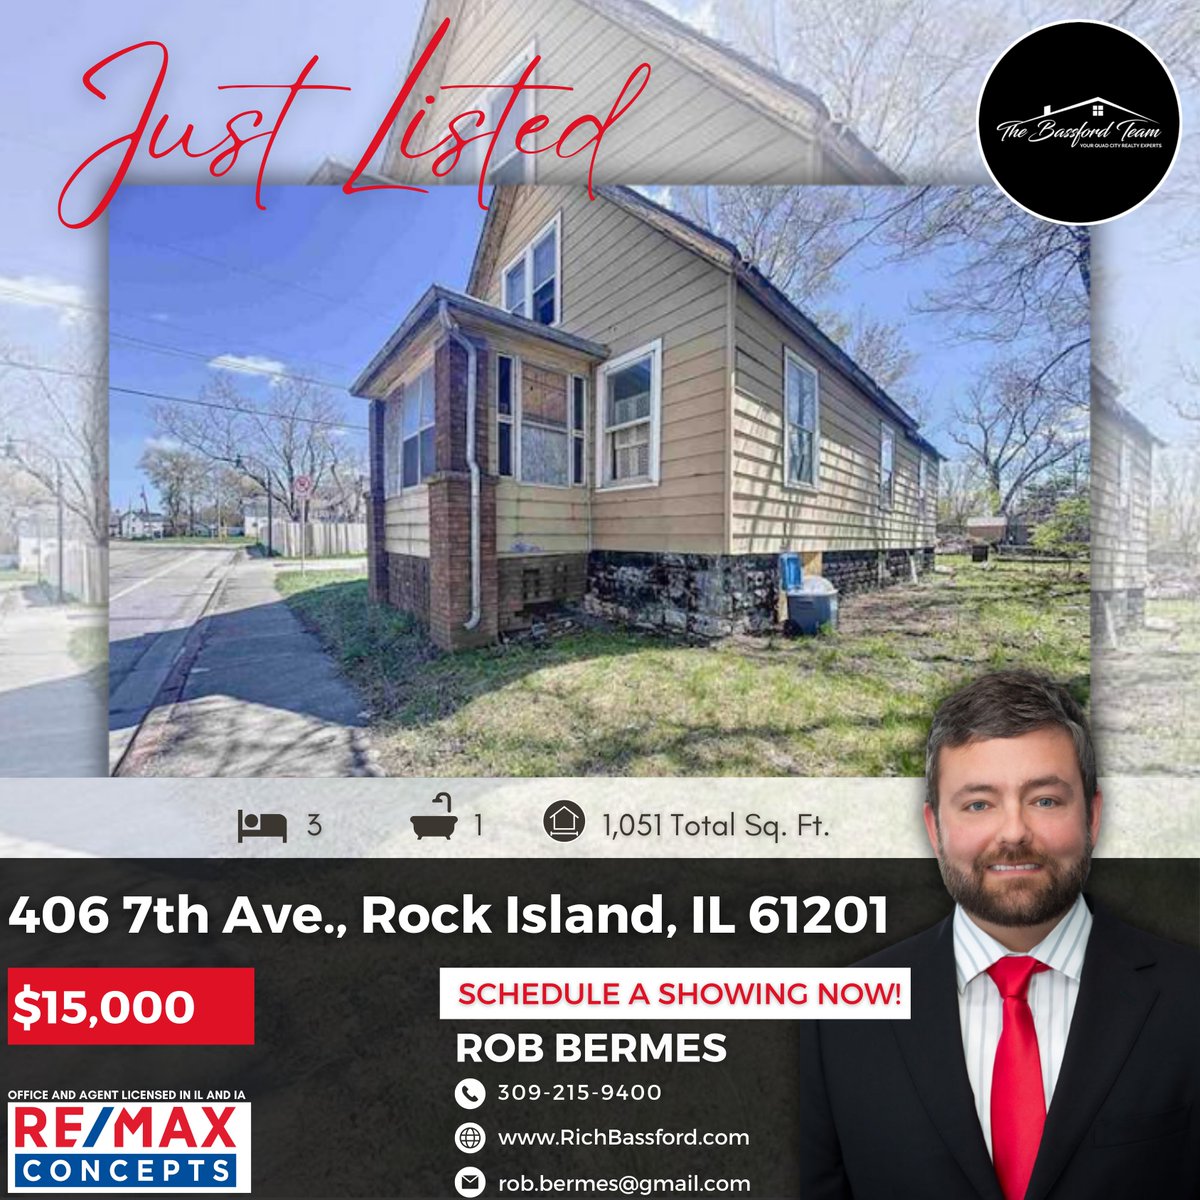 This 3-bed, 1-bath fixer-upper in Rock Island is the blank canvas you've been waiting for!
..
🔗👉🏻👉🏻👉🏻 richbassford.com/property-searc…
..
#quadcitiesillinois #quadcitiesrealtor  #quadcitieshomesforsale #qcproperties #RockIslandhomesforsale #remaxconcepts #thebassfordteam #richbassford